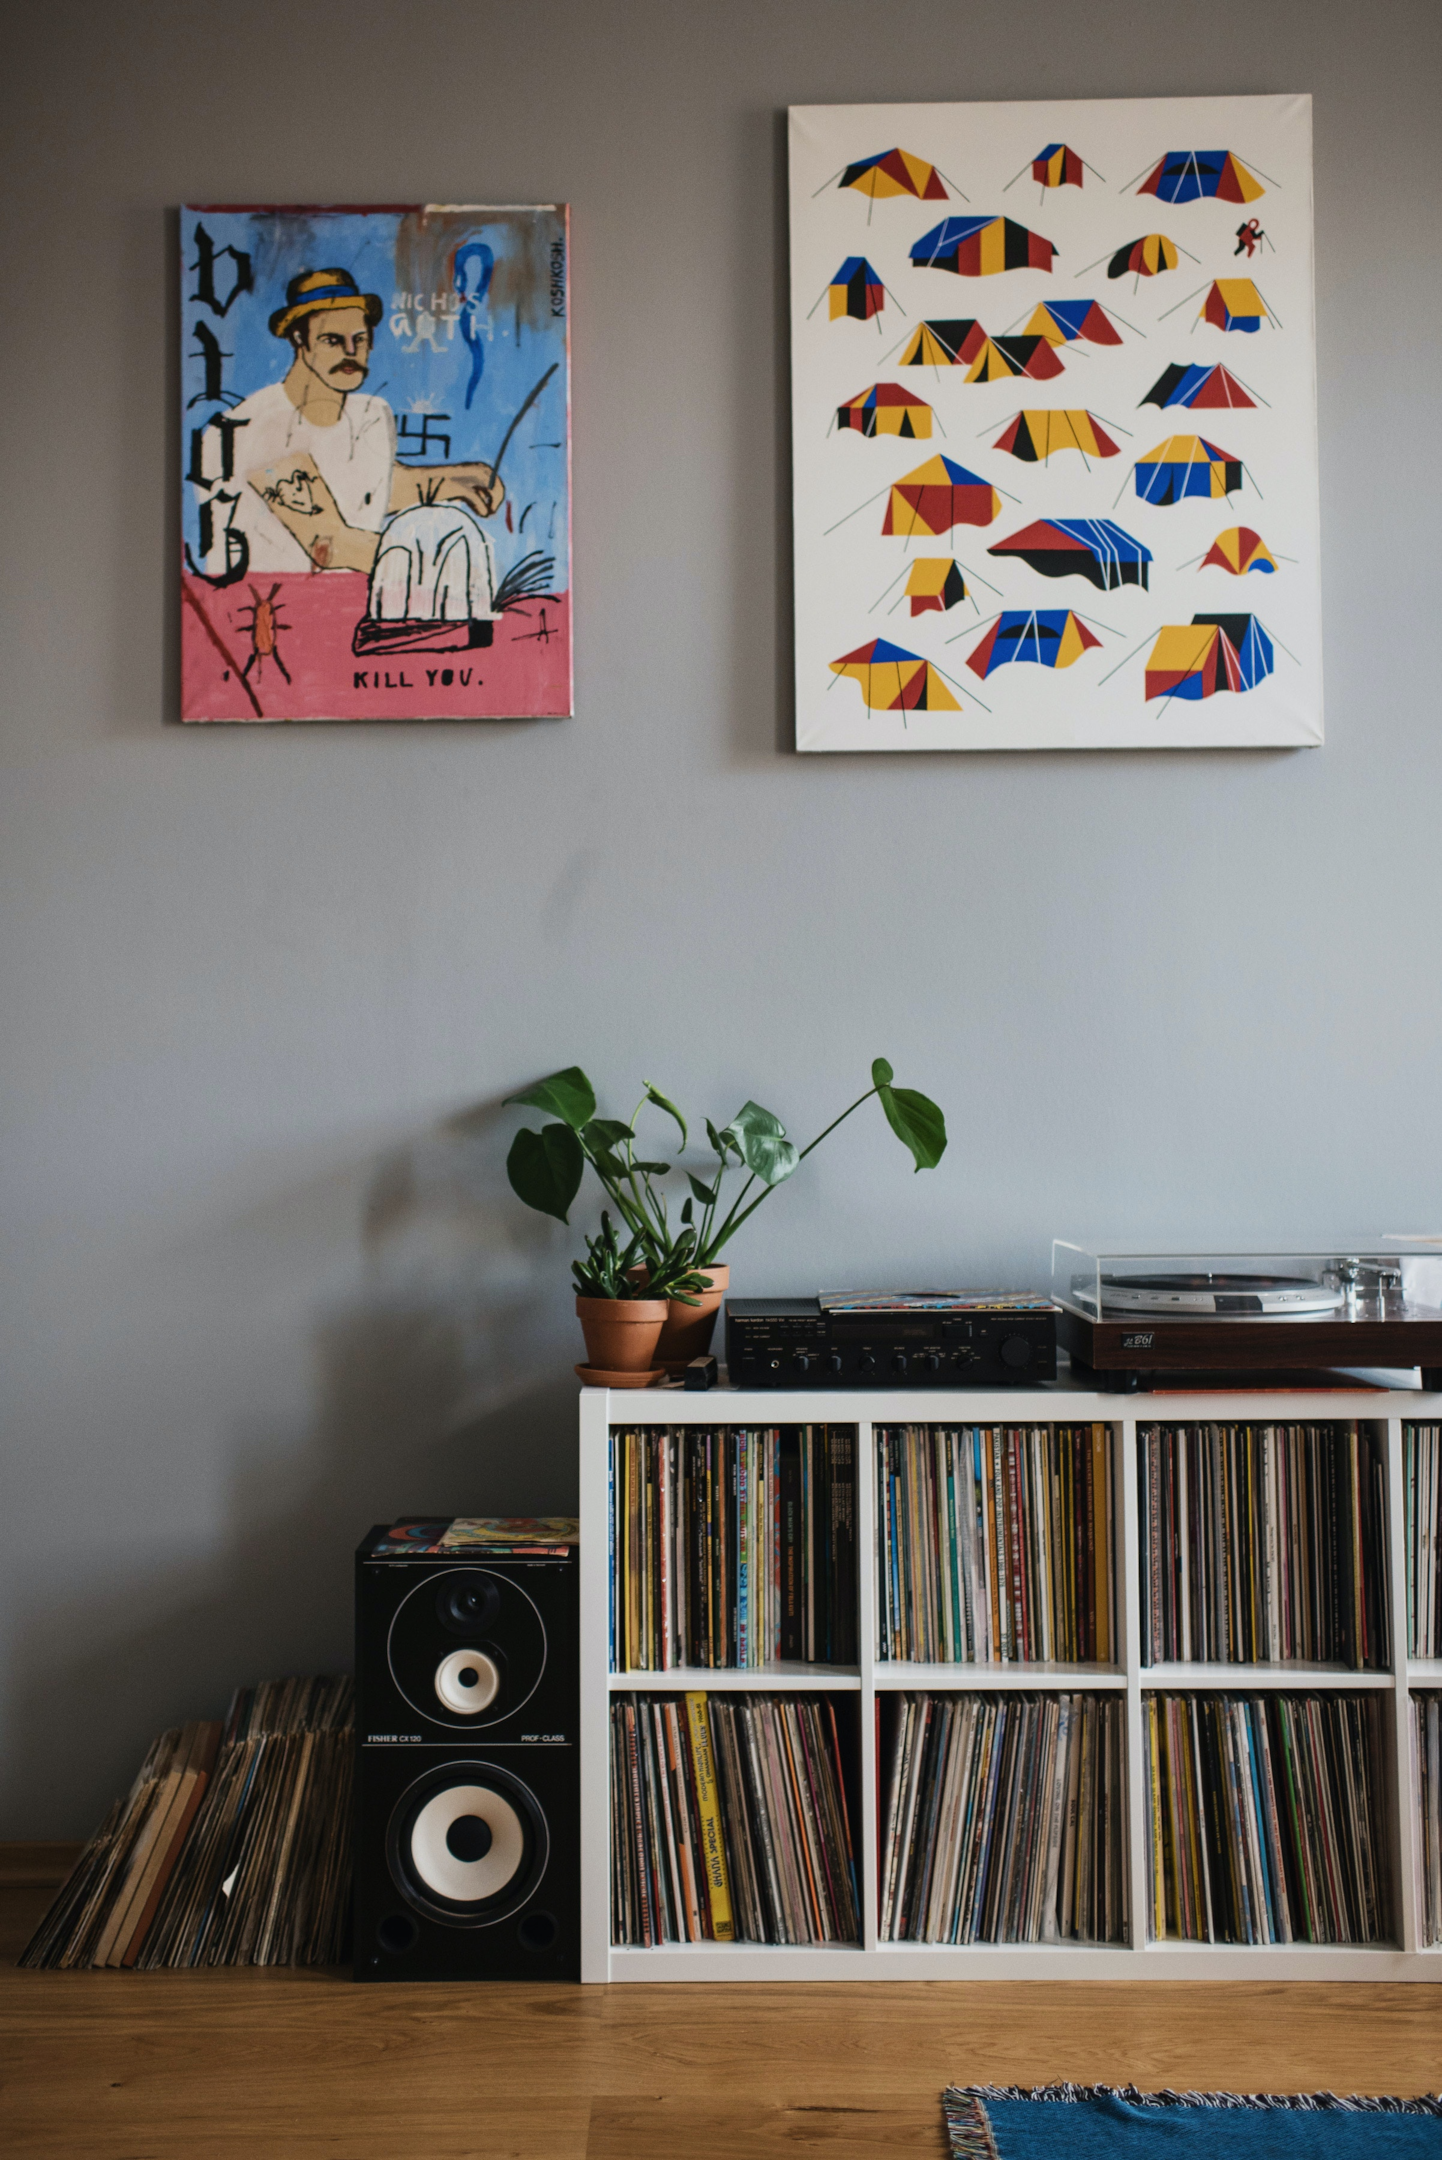 Photo by Ksenia Chernaya: https://www.pexels.com/photo/collection-of-vinyl-records-on-shelf-in-apartment-3952039/